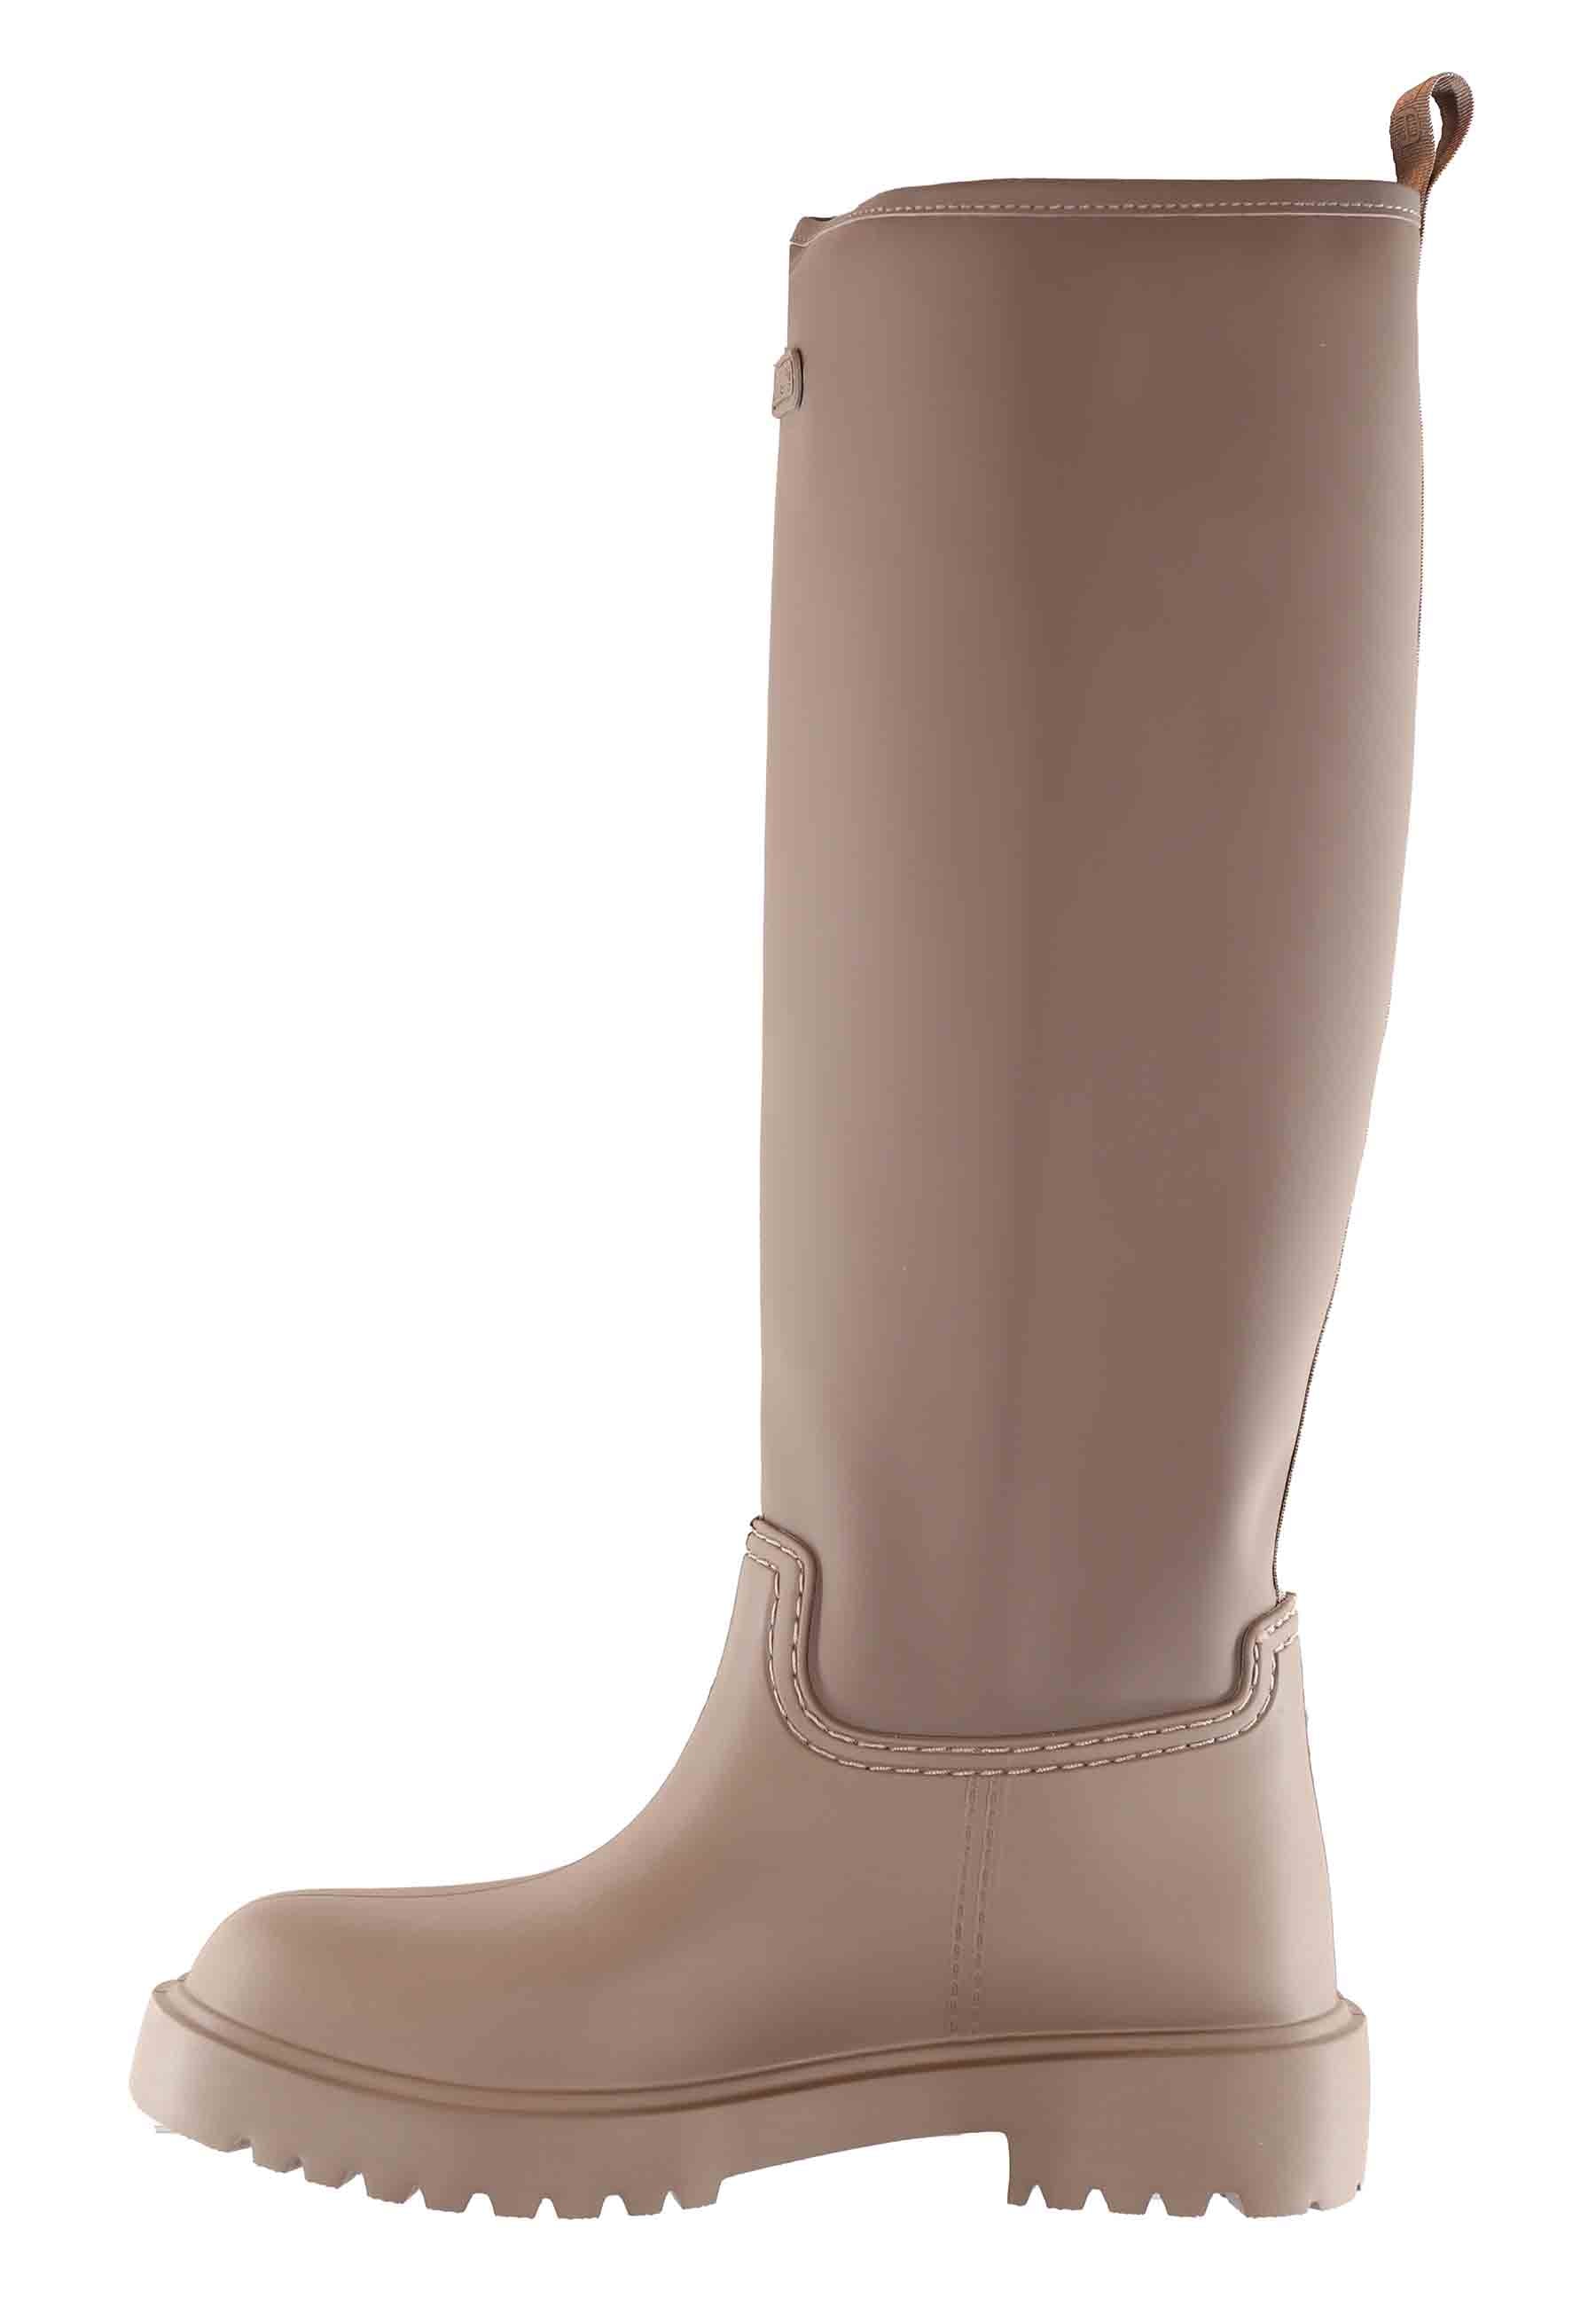 Women's rain tube boots in PVC and taupe fabric